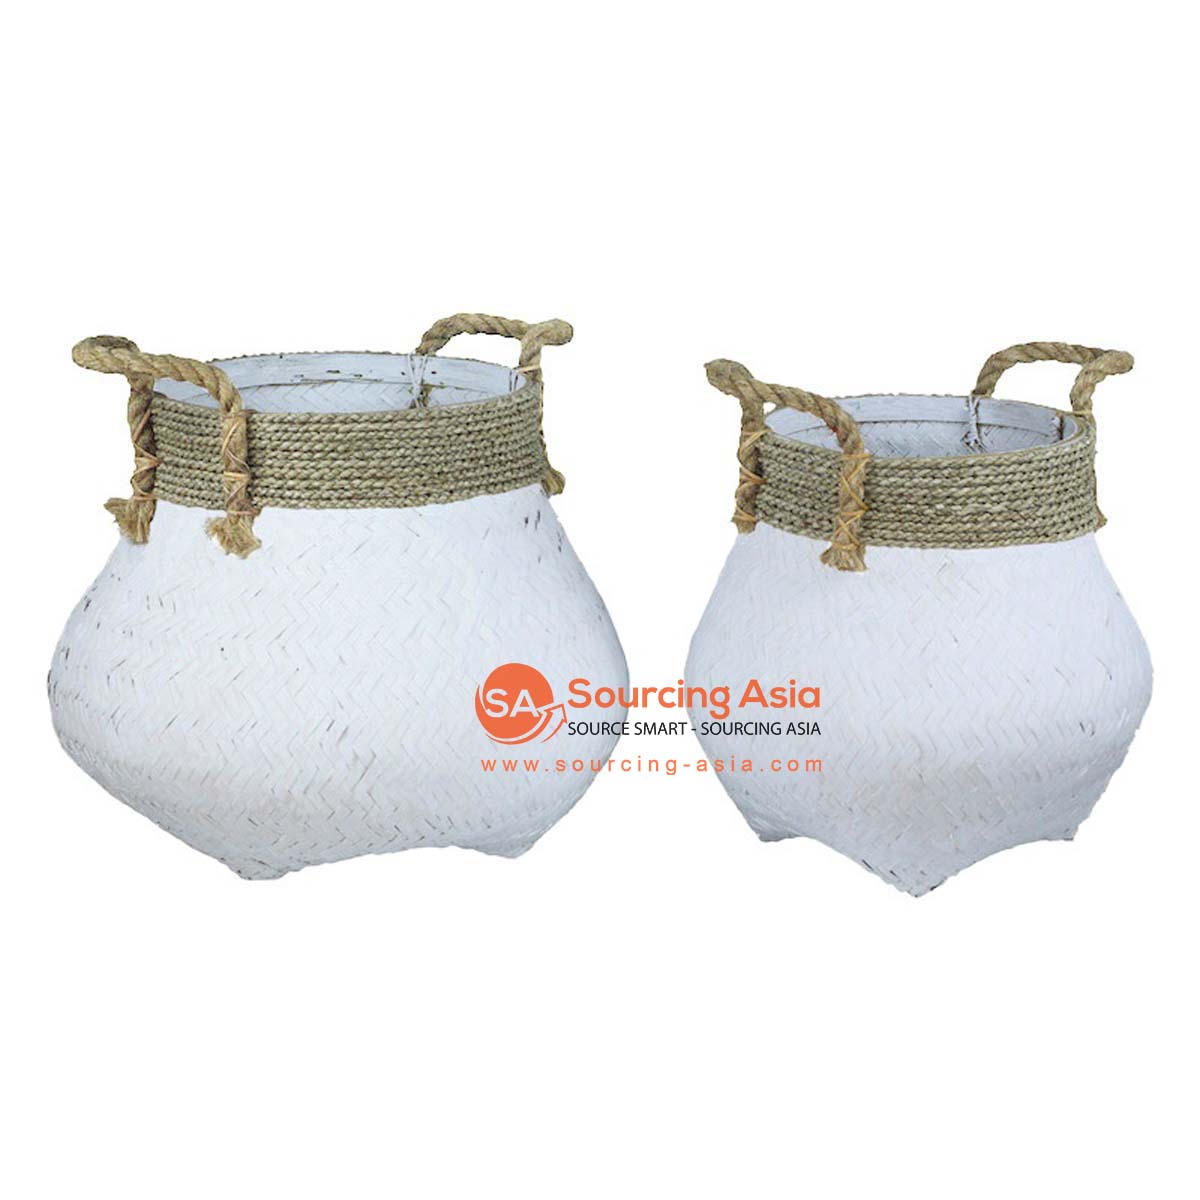 SHL483 SET OF TWO WHITE WASH BAMBOO AND NATURAL PANDANUS BASKETS WITH HANDLE